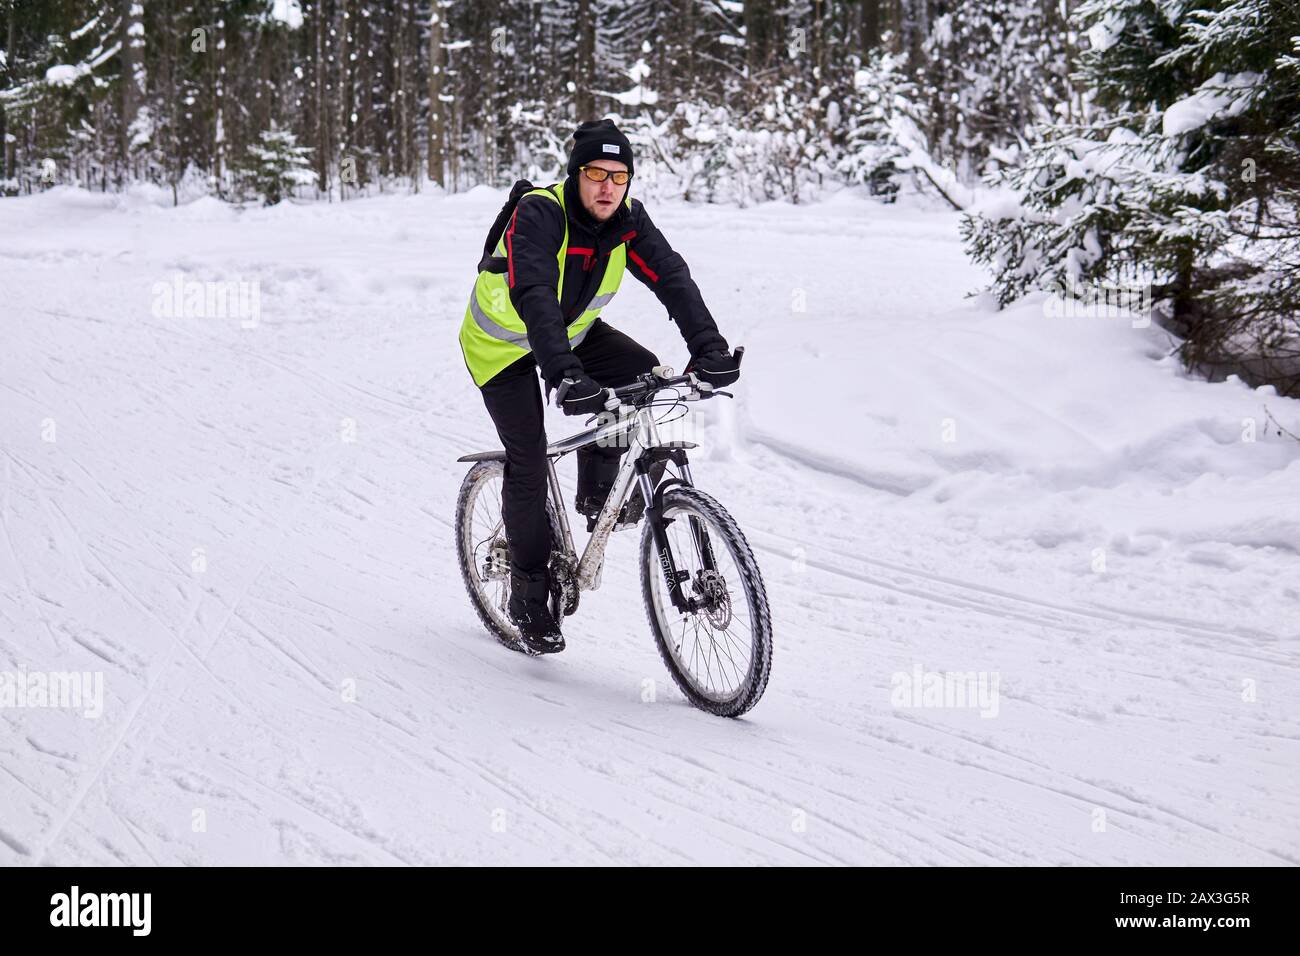 Perm, Russia - February 02, 2020: cyclist in winter in a snowy forest Stock Photo